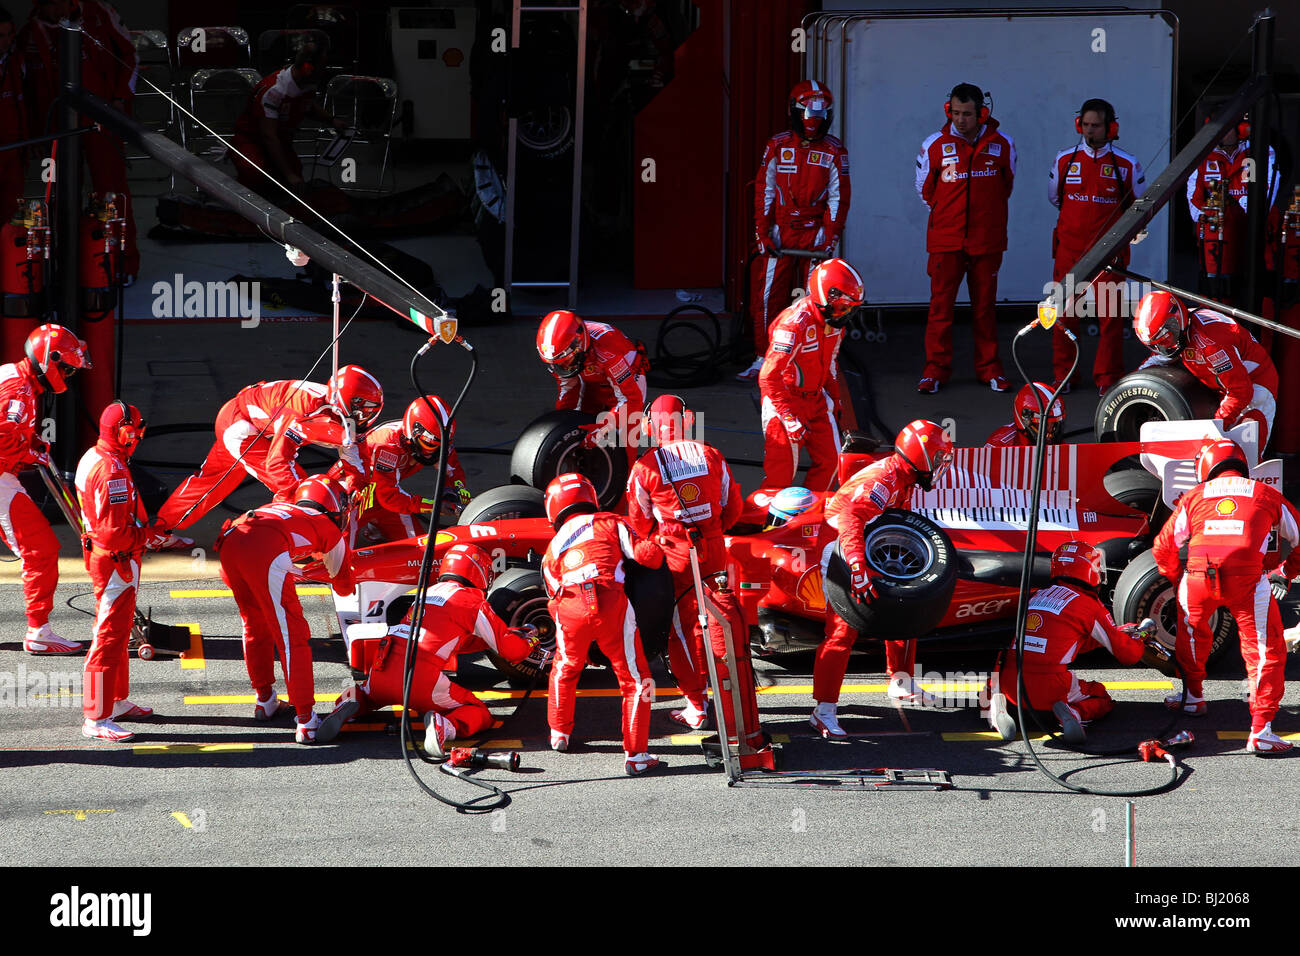 Fernando Alonso of the 2010 Ferrari team doing a pit stop at the ...